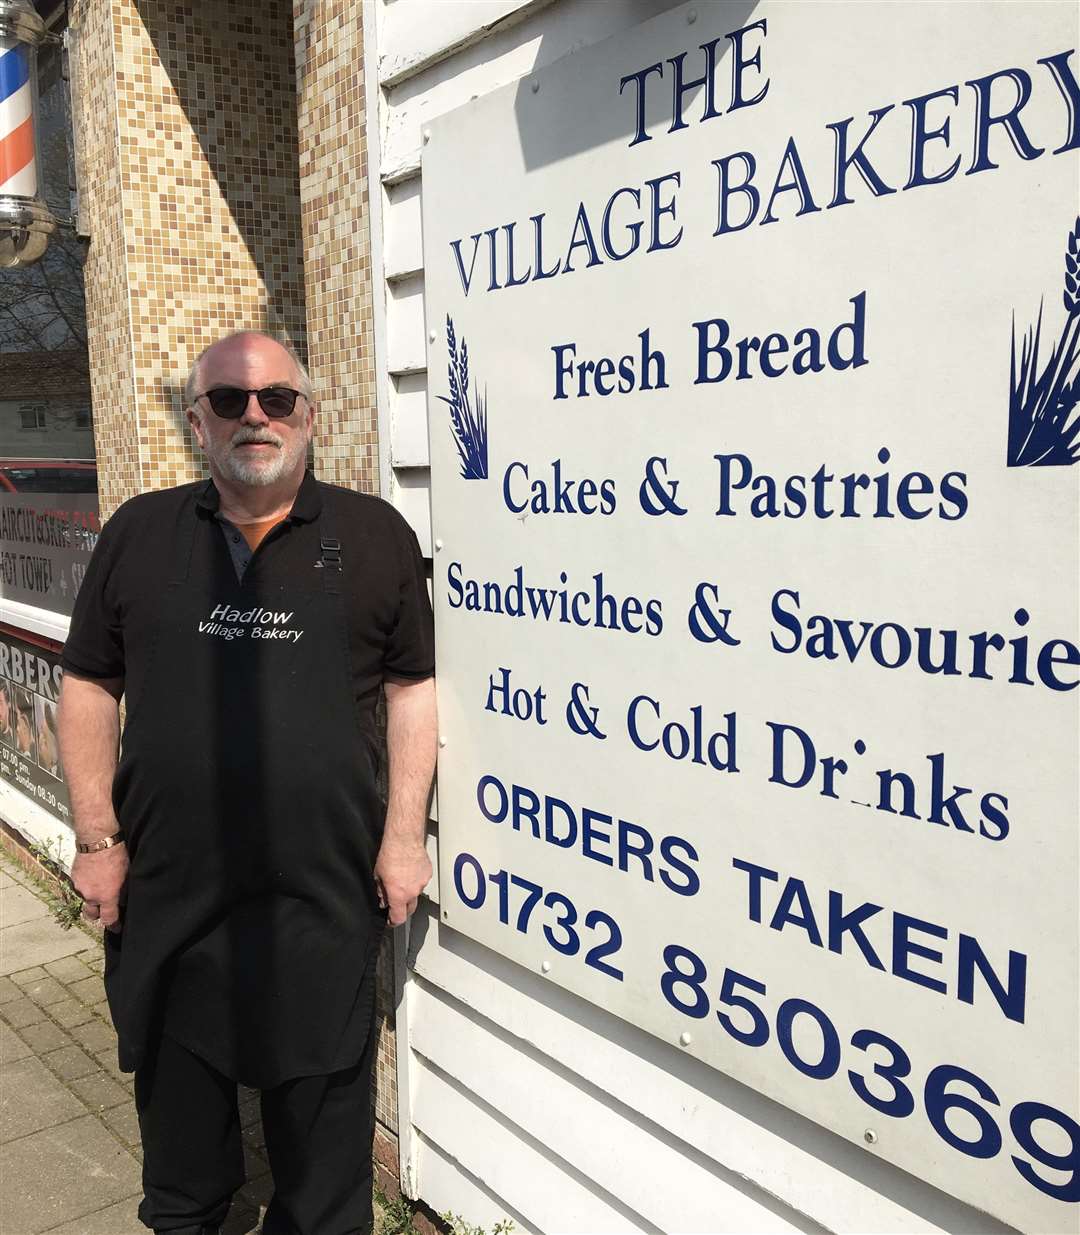 Martin Johnson, owner of The Village Bakery in Hadlow